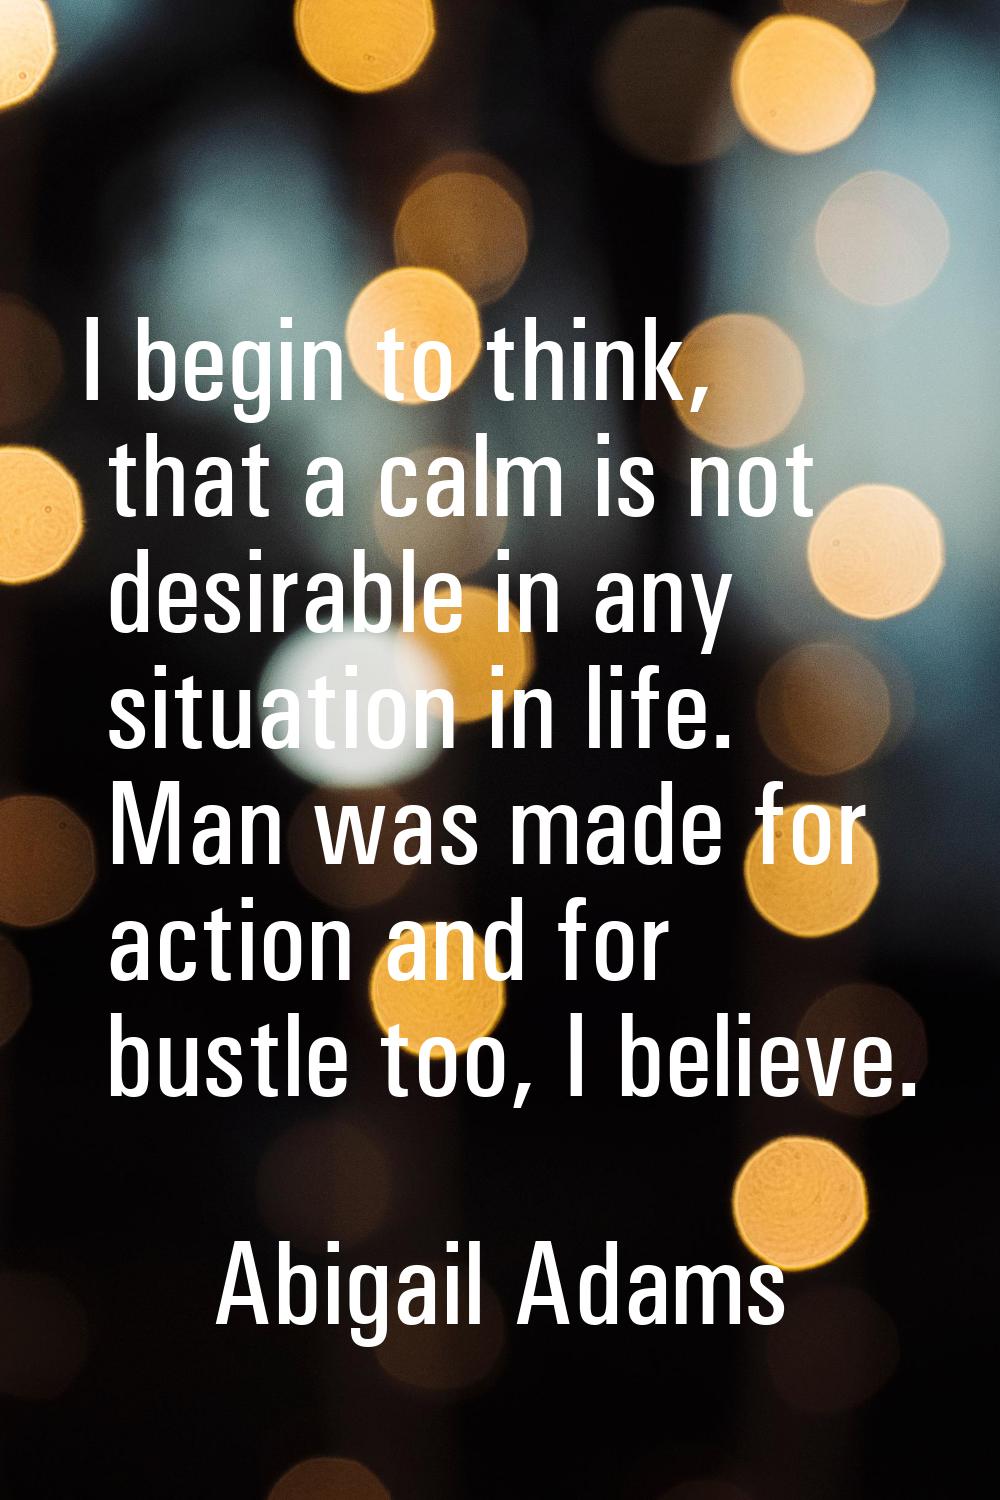 I begin to think, that a calm is not desirable in any situation in life. Man was made for action an